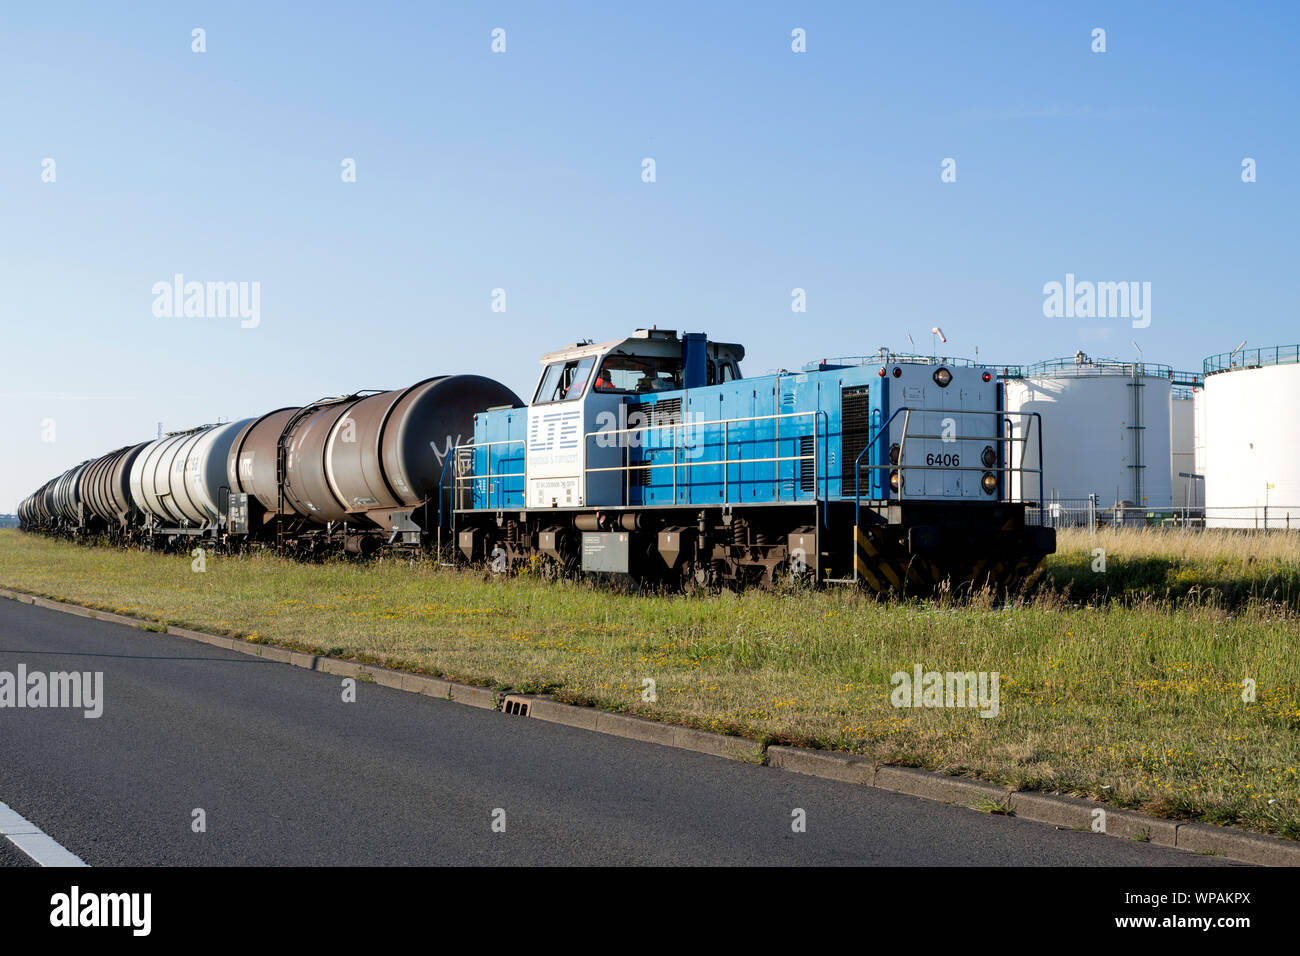 Freight train with LTE NS Class 6400 locomotive Stock Photo